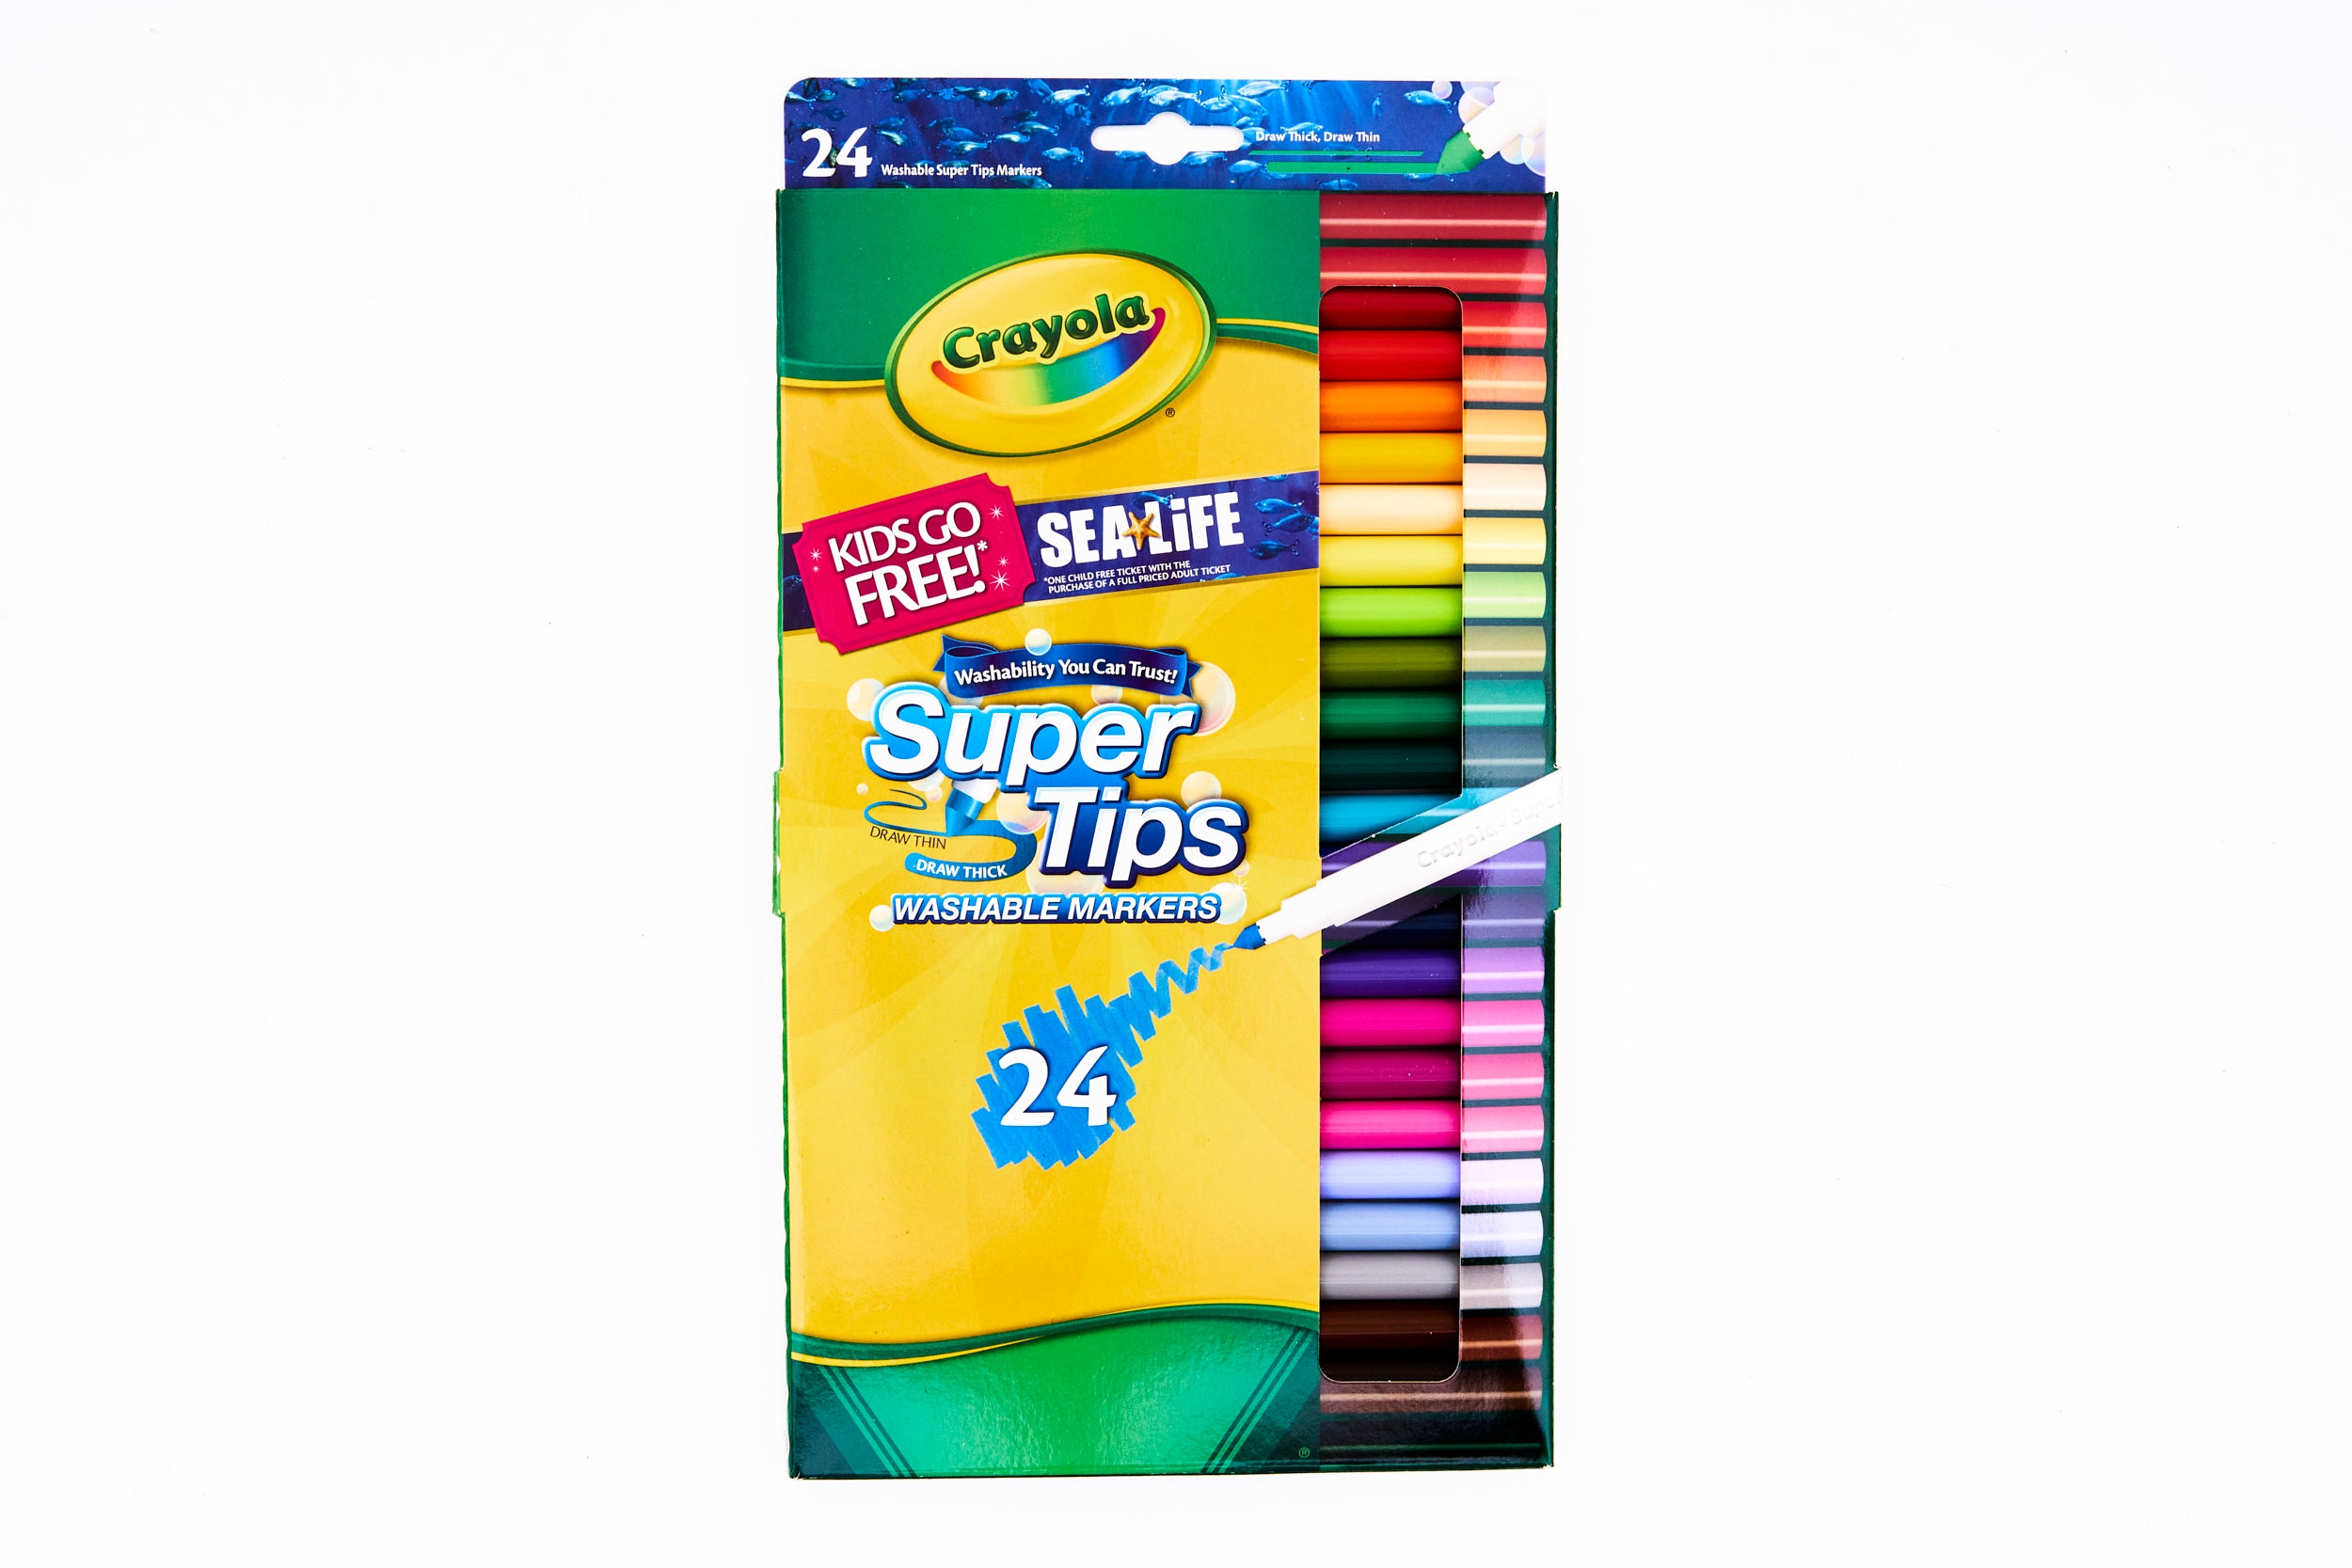 Crayola Broad Line Washable Markers 12pc (case of 24)